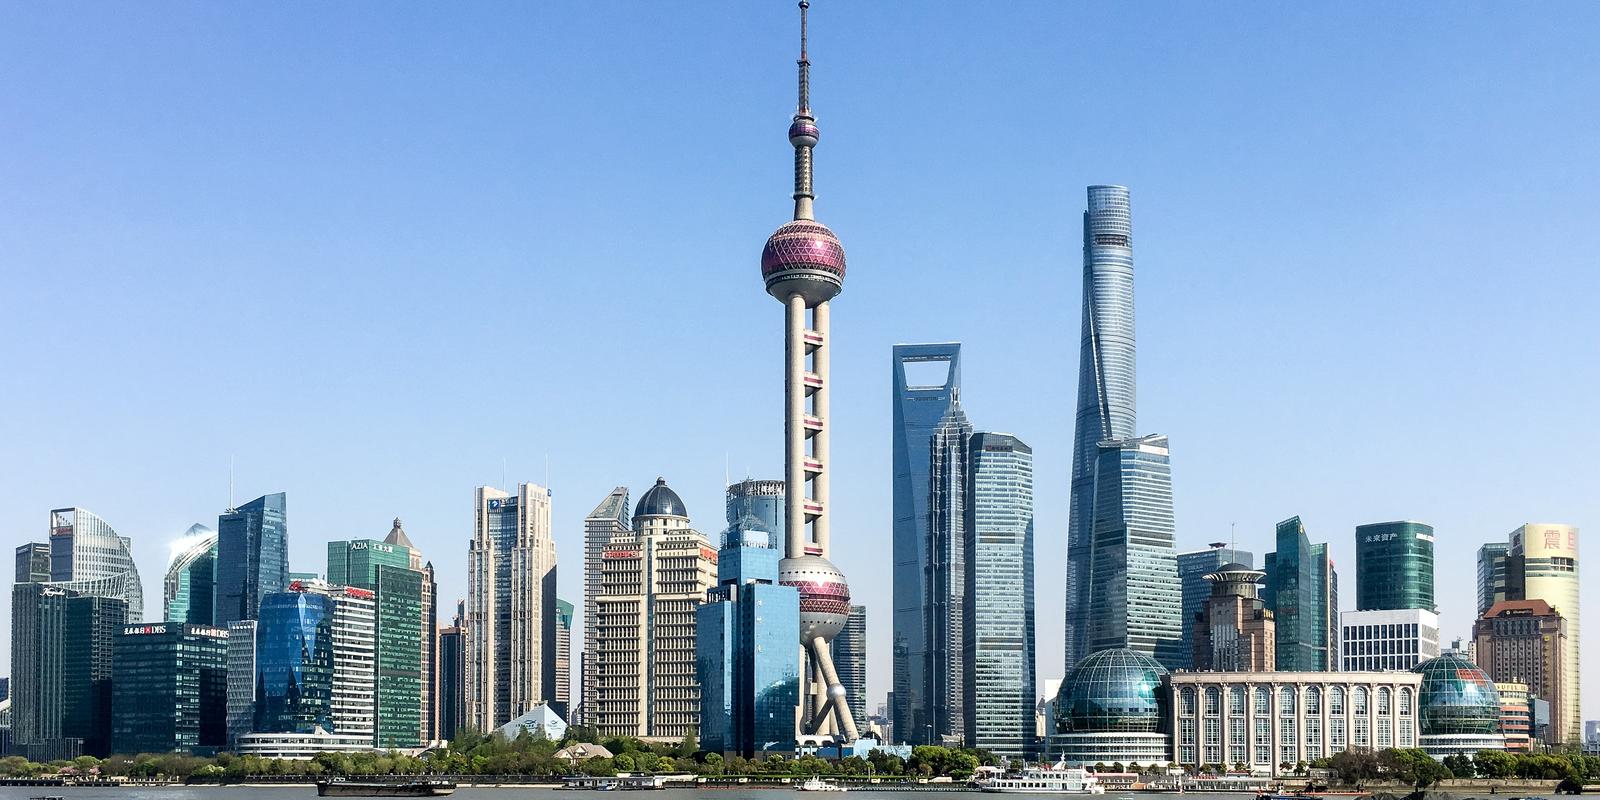 View of Shanghai skyline including Oriential Pearl Tower